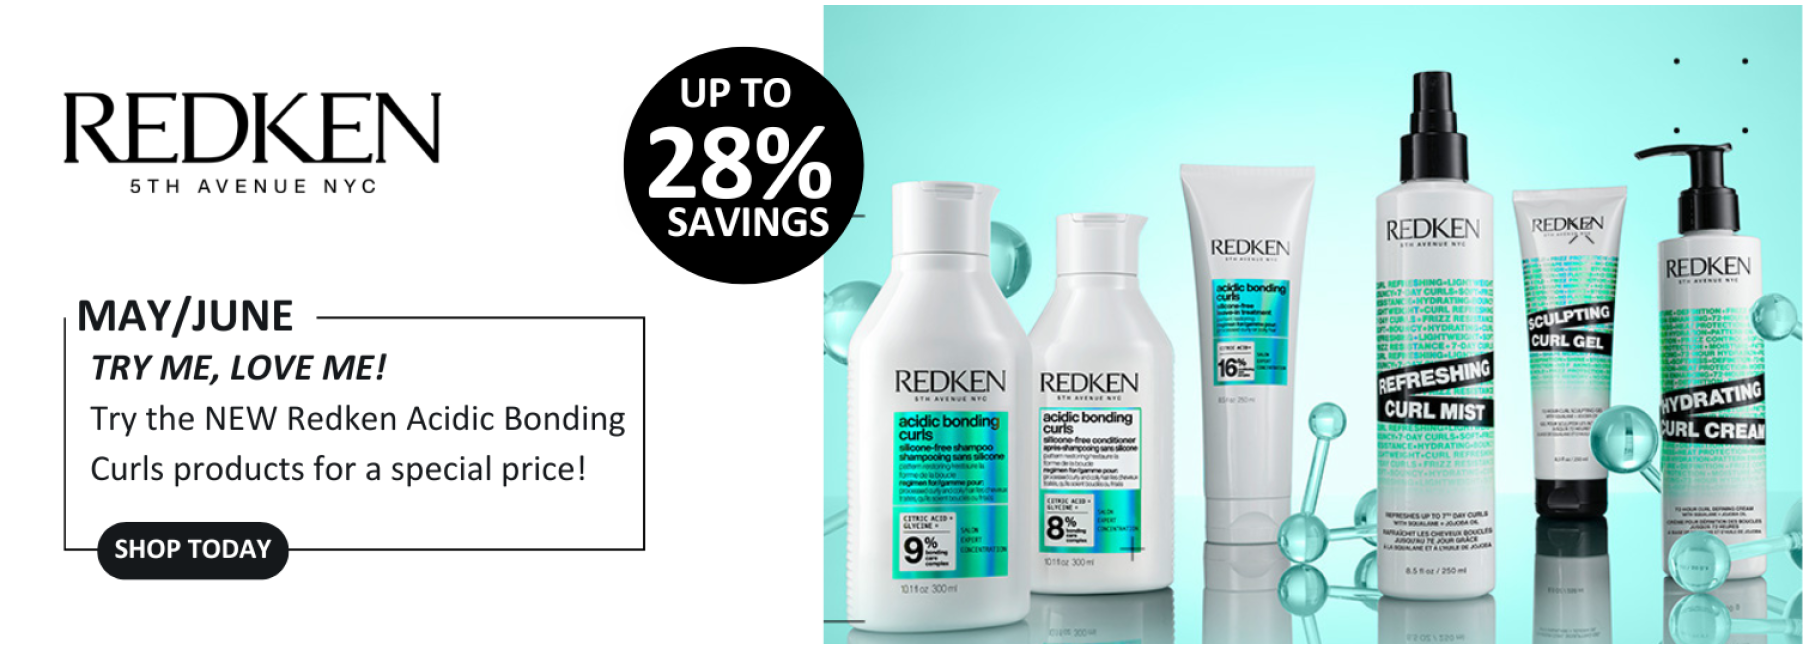 REDKEN CURLS TRY ME OFFER MAY